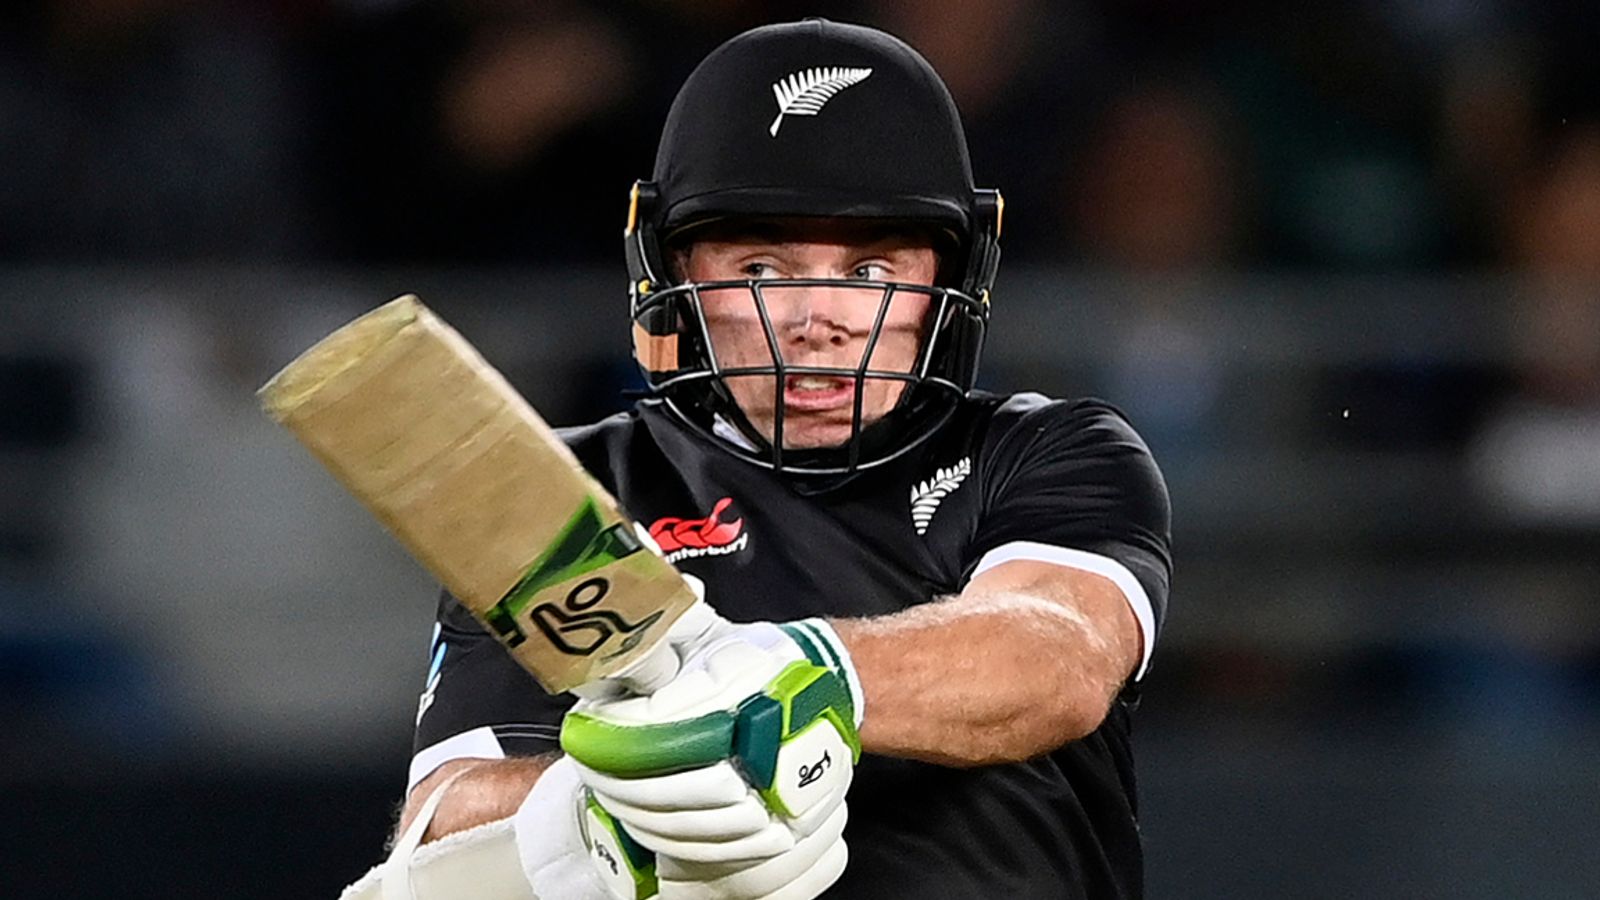 Tom Latham leads New Zealand to victory over India with career-best 145 in first One-Day International